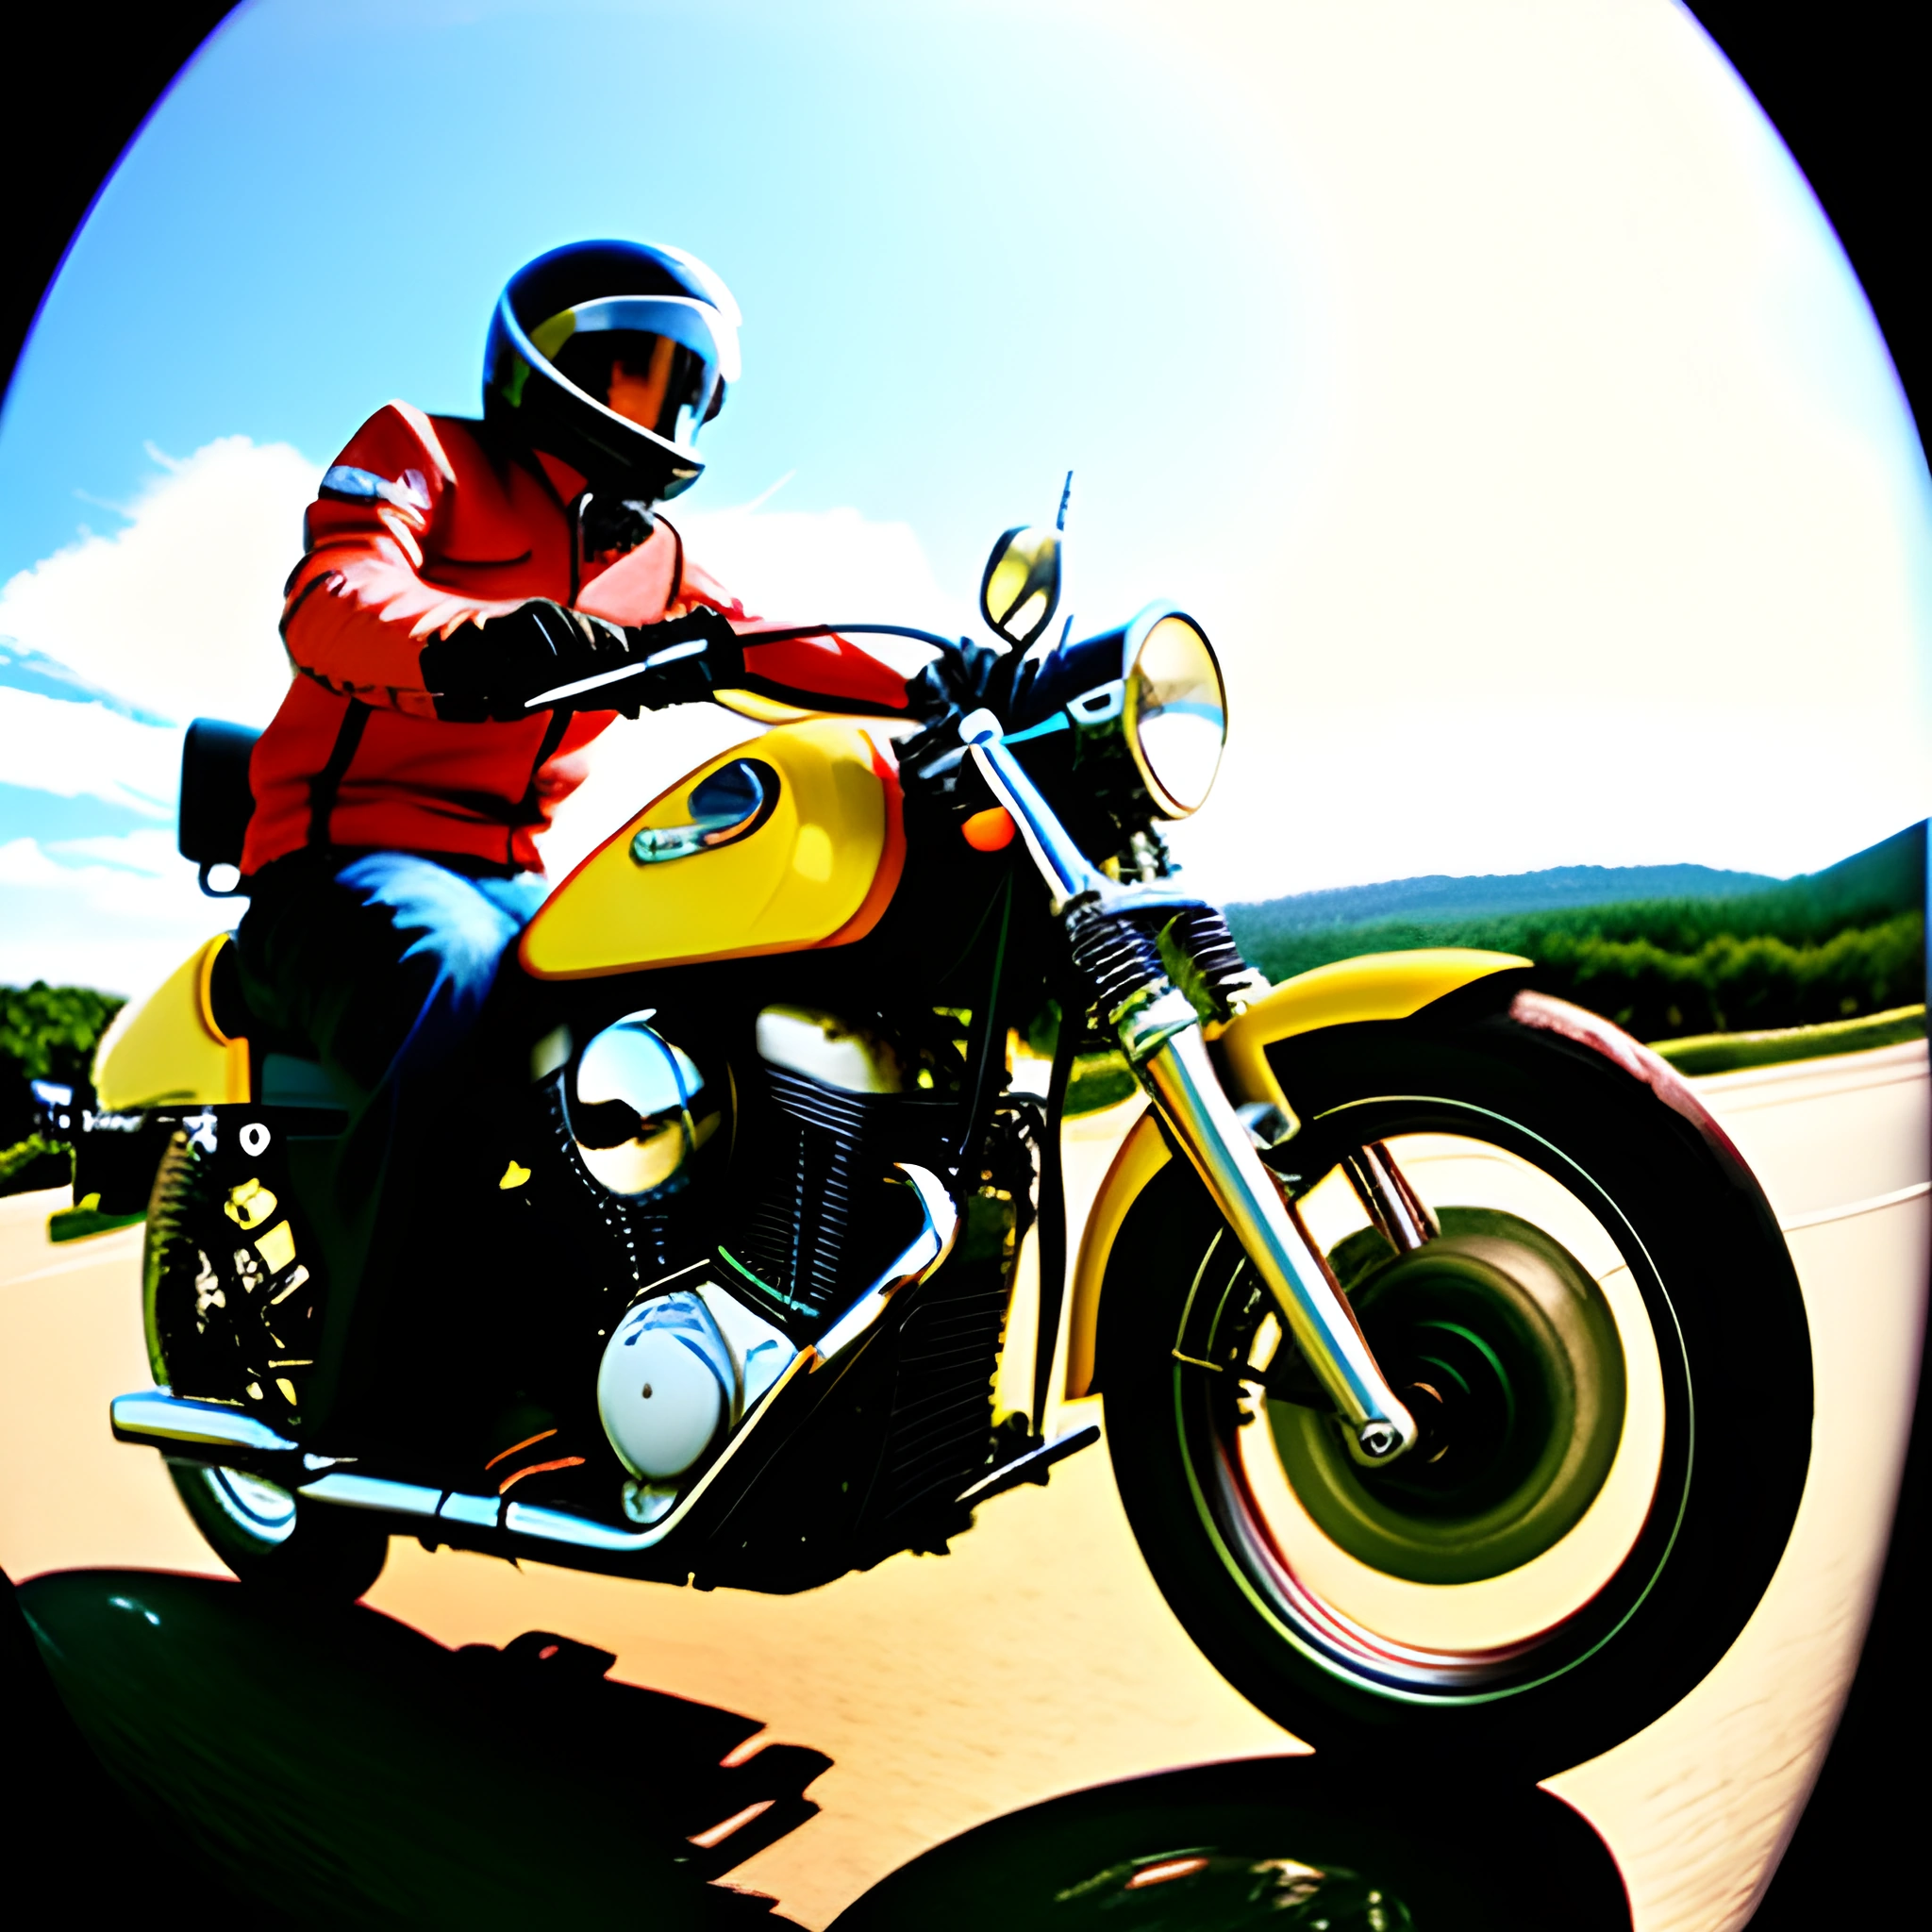 riding a yellow motorcycle on a road with a blue sky